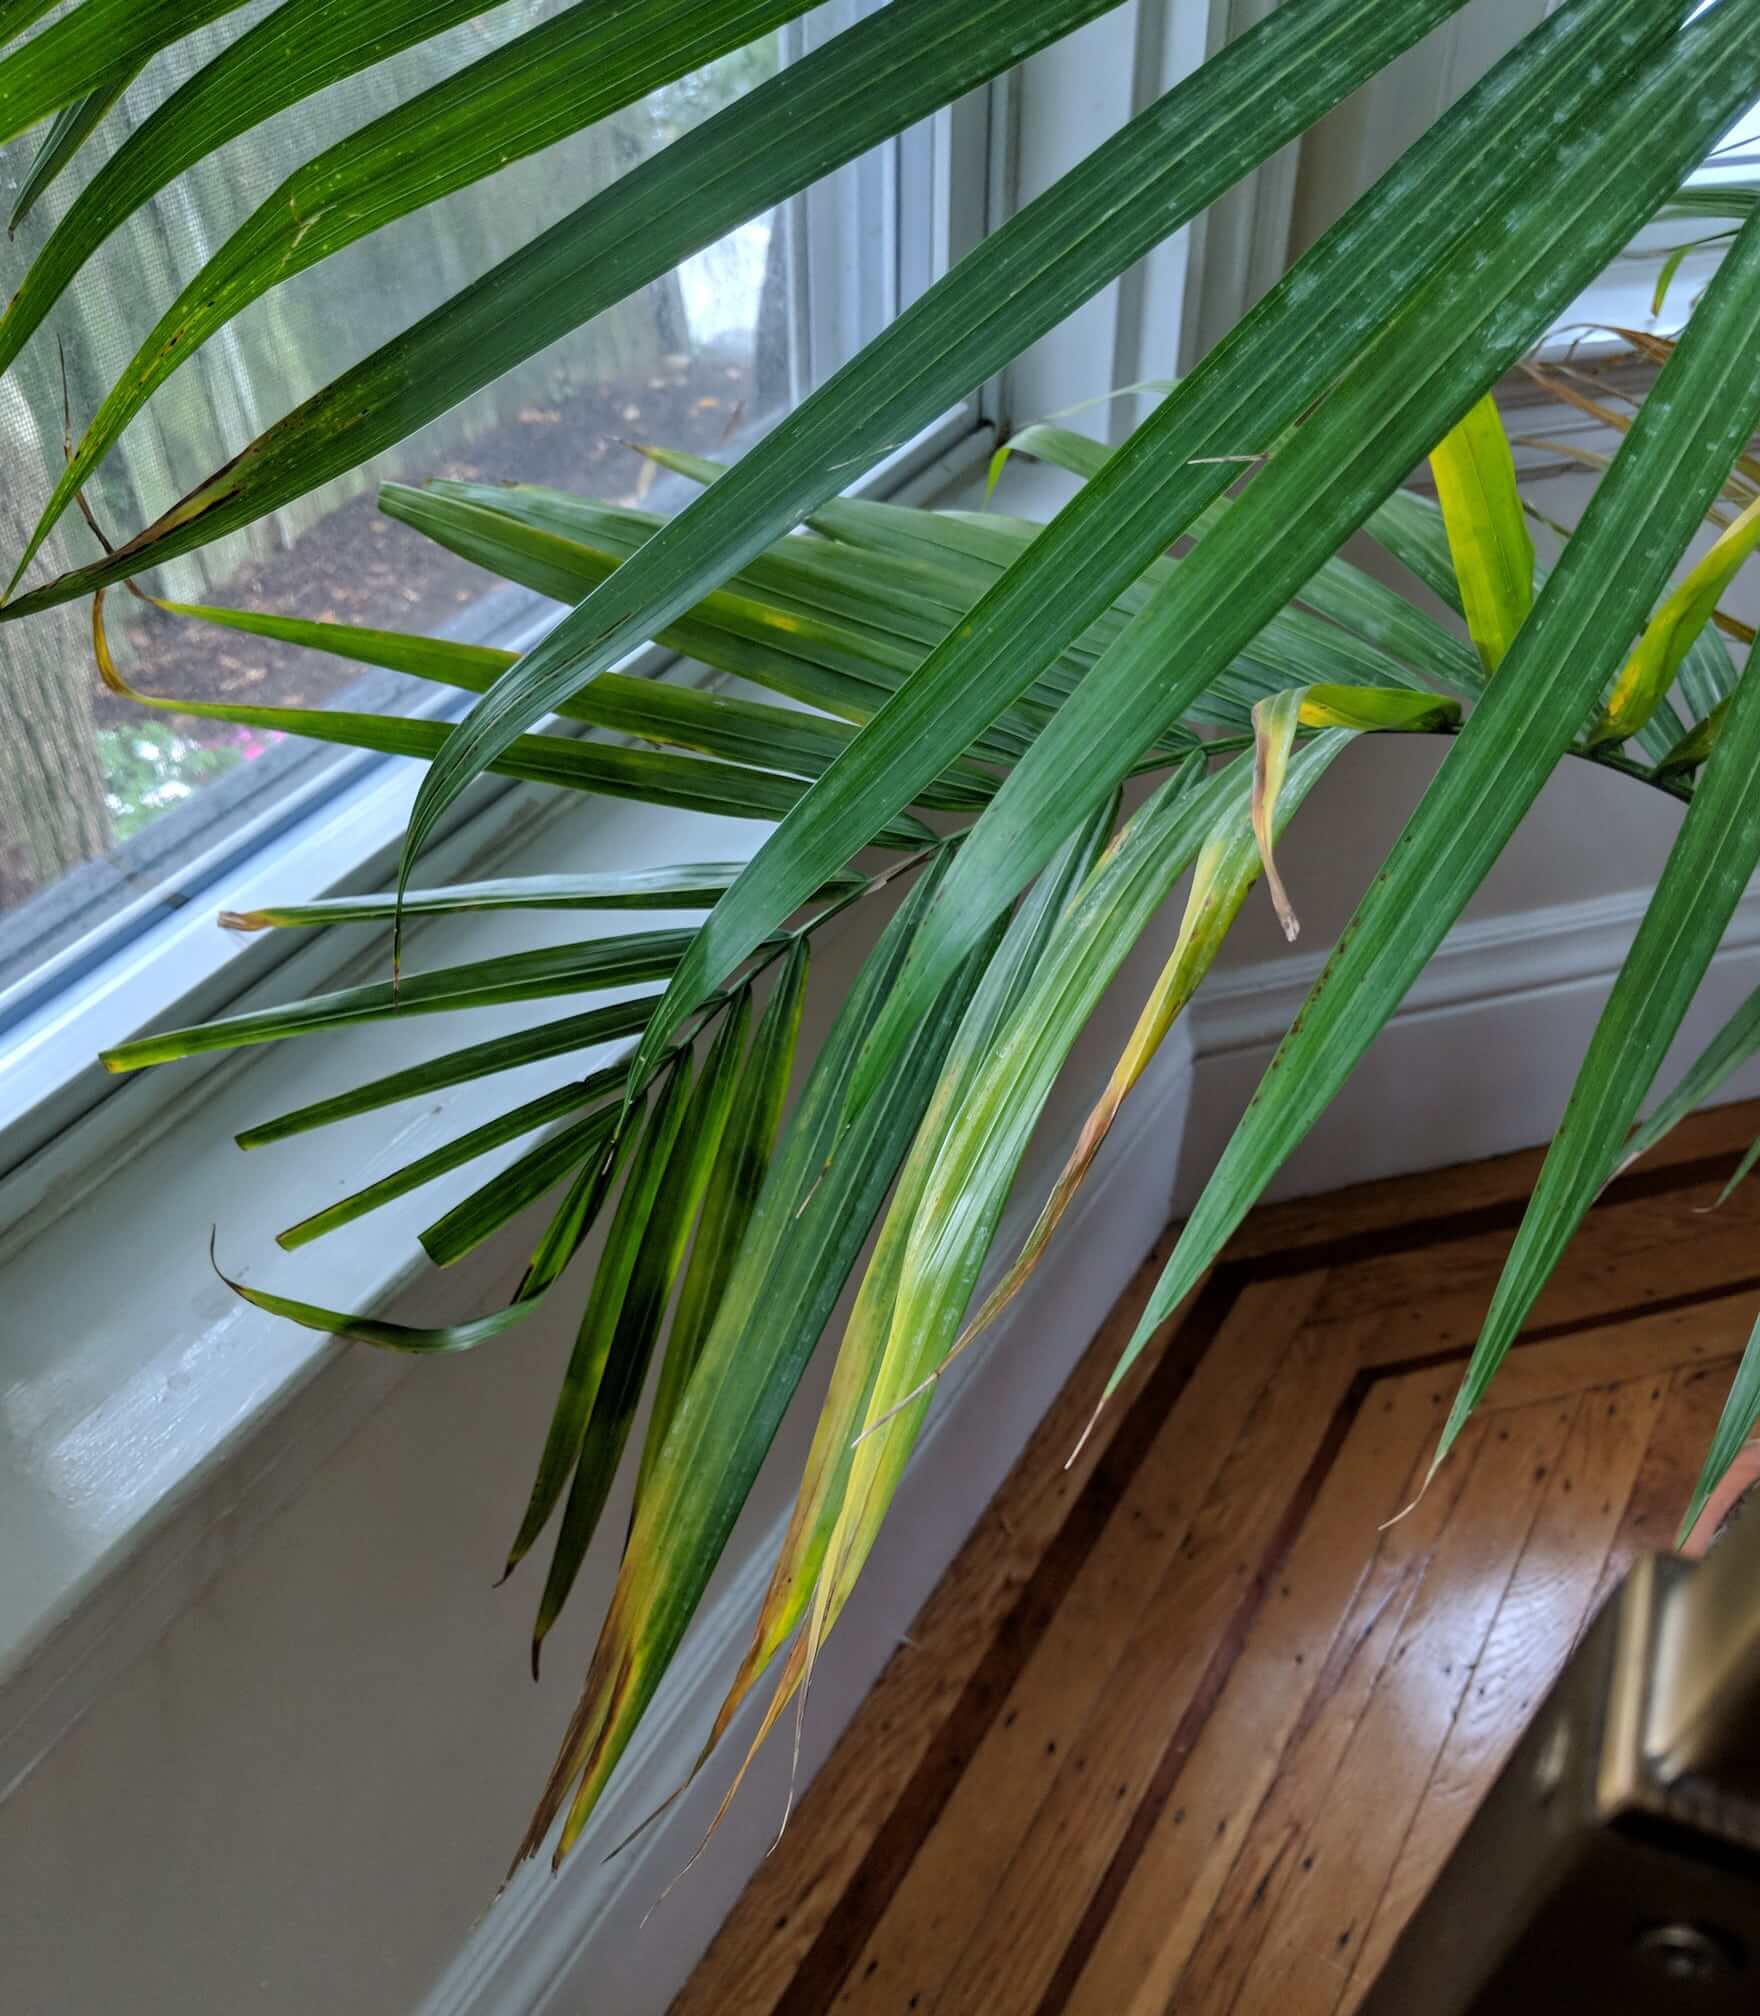 https://bloomscape.com/wp-content/uploads/2018/09/majesty-palm-yellow-leaves_main-image-1.jpg?ver=6864